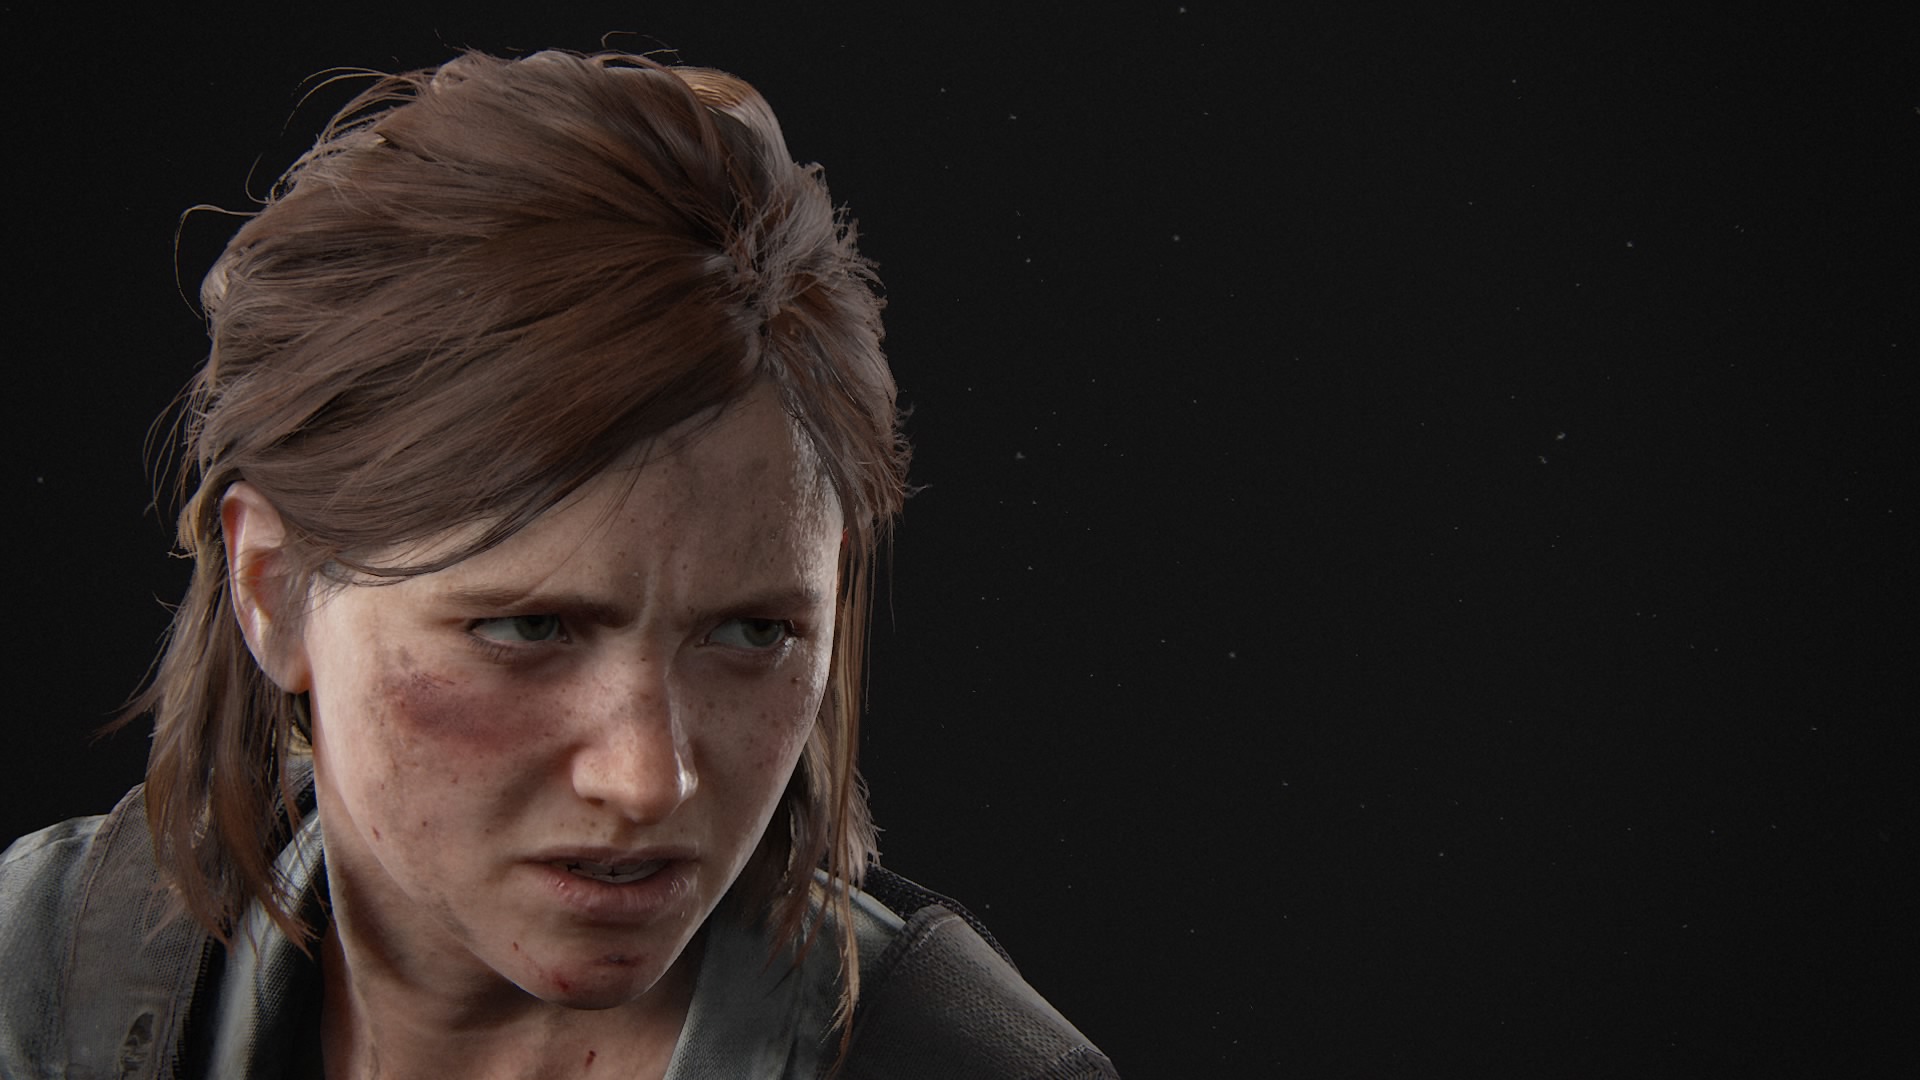 General 1920x1080 The Last of Us 2 PlayStation 4 Ellie Williams Naughty Dog video game girls video games women brunette black background simple background video game characters